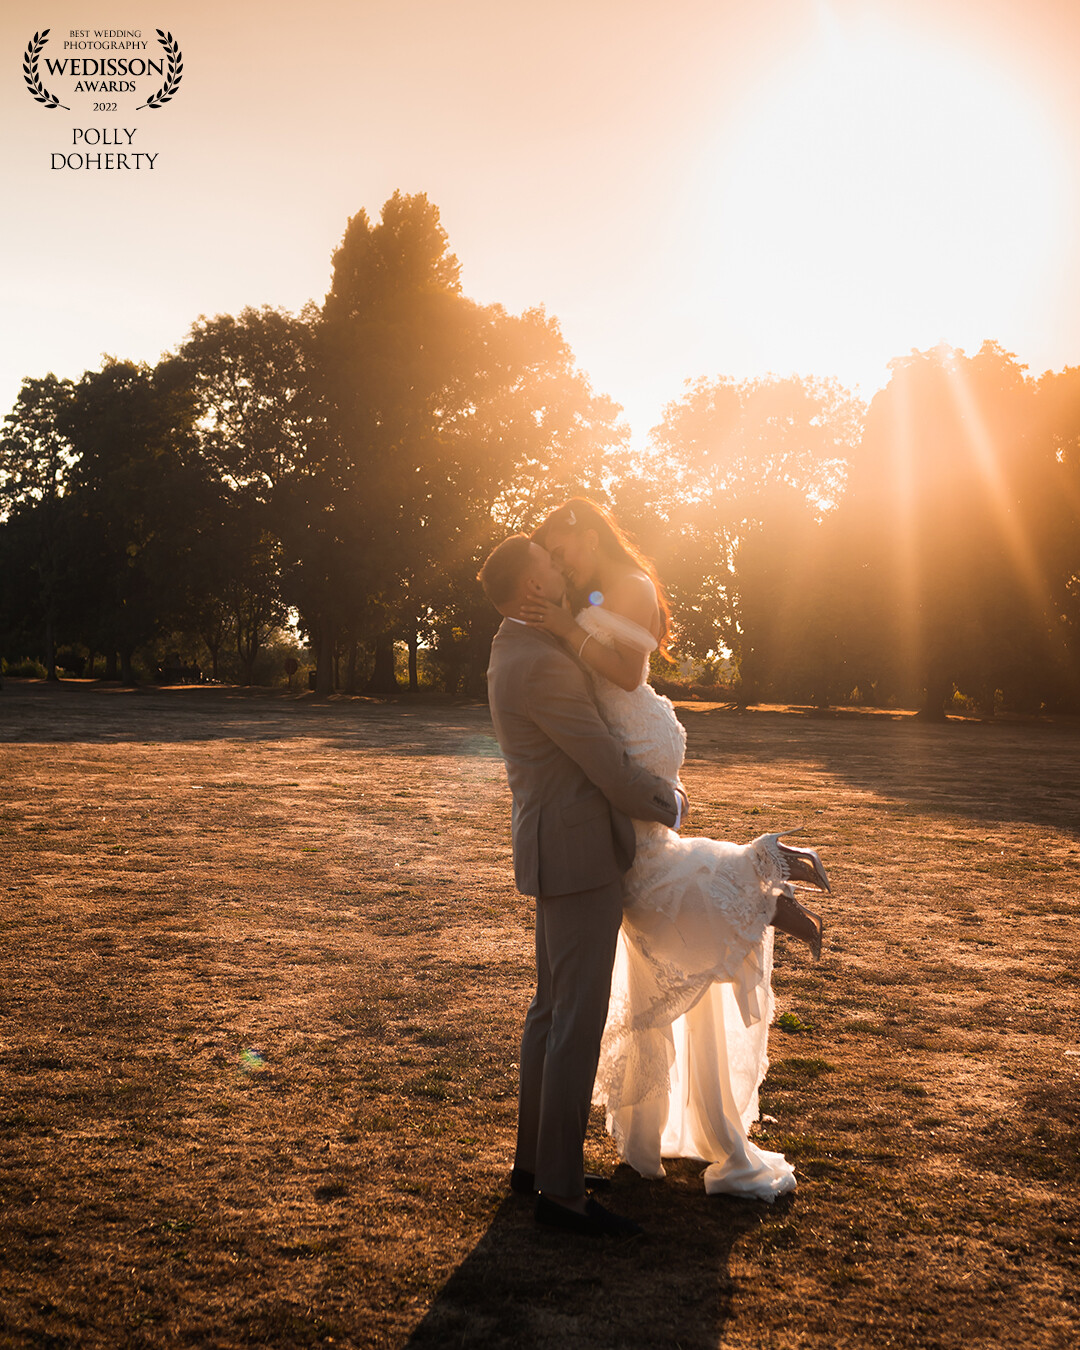 Taken at Golden Hour, we had so much fun in this light and this is one of many. Thank you to Lauren & Jordan for helping do this lift so perfectly you smashed it!